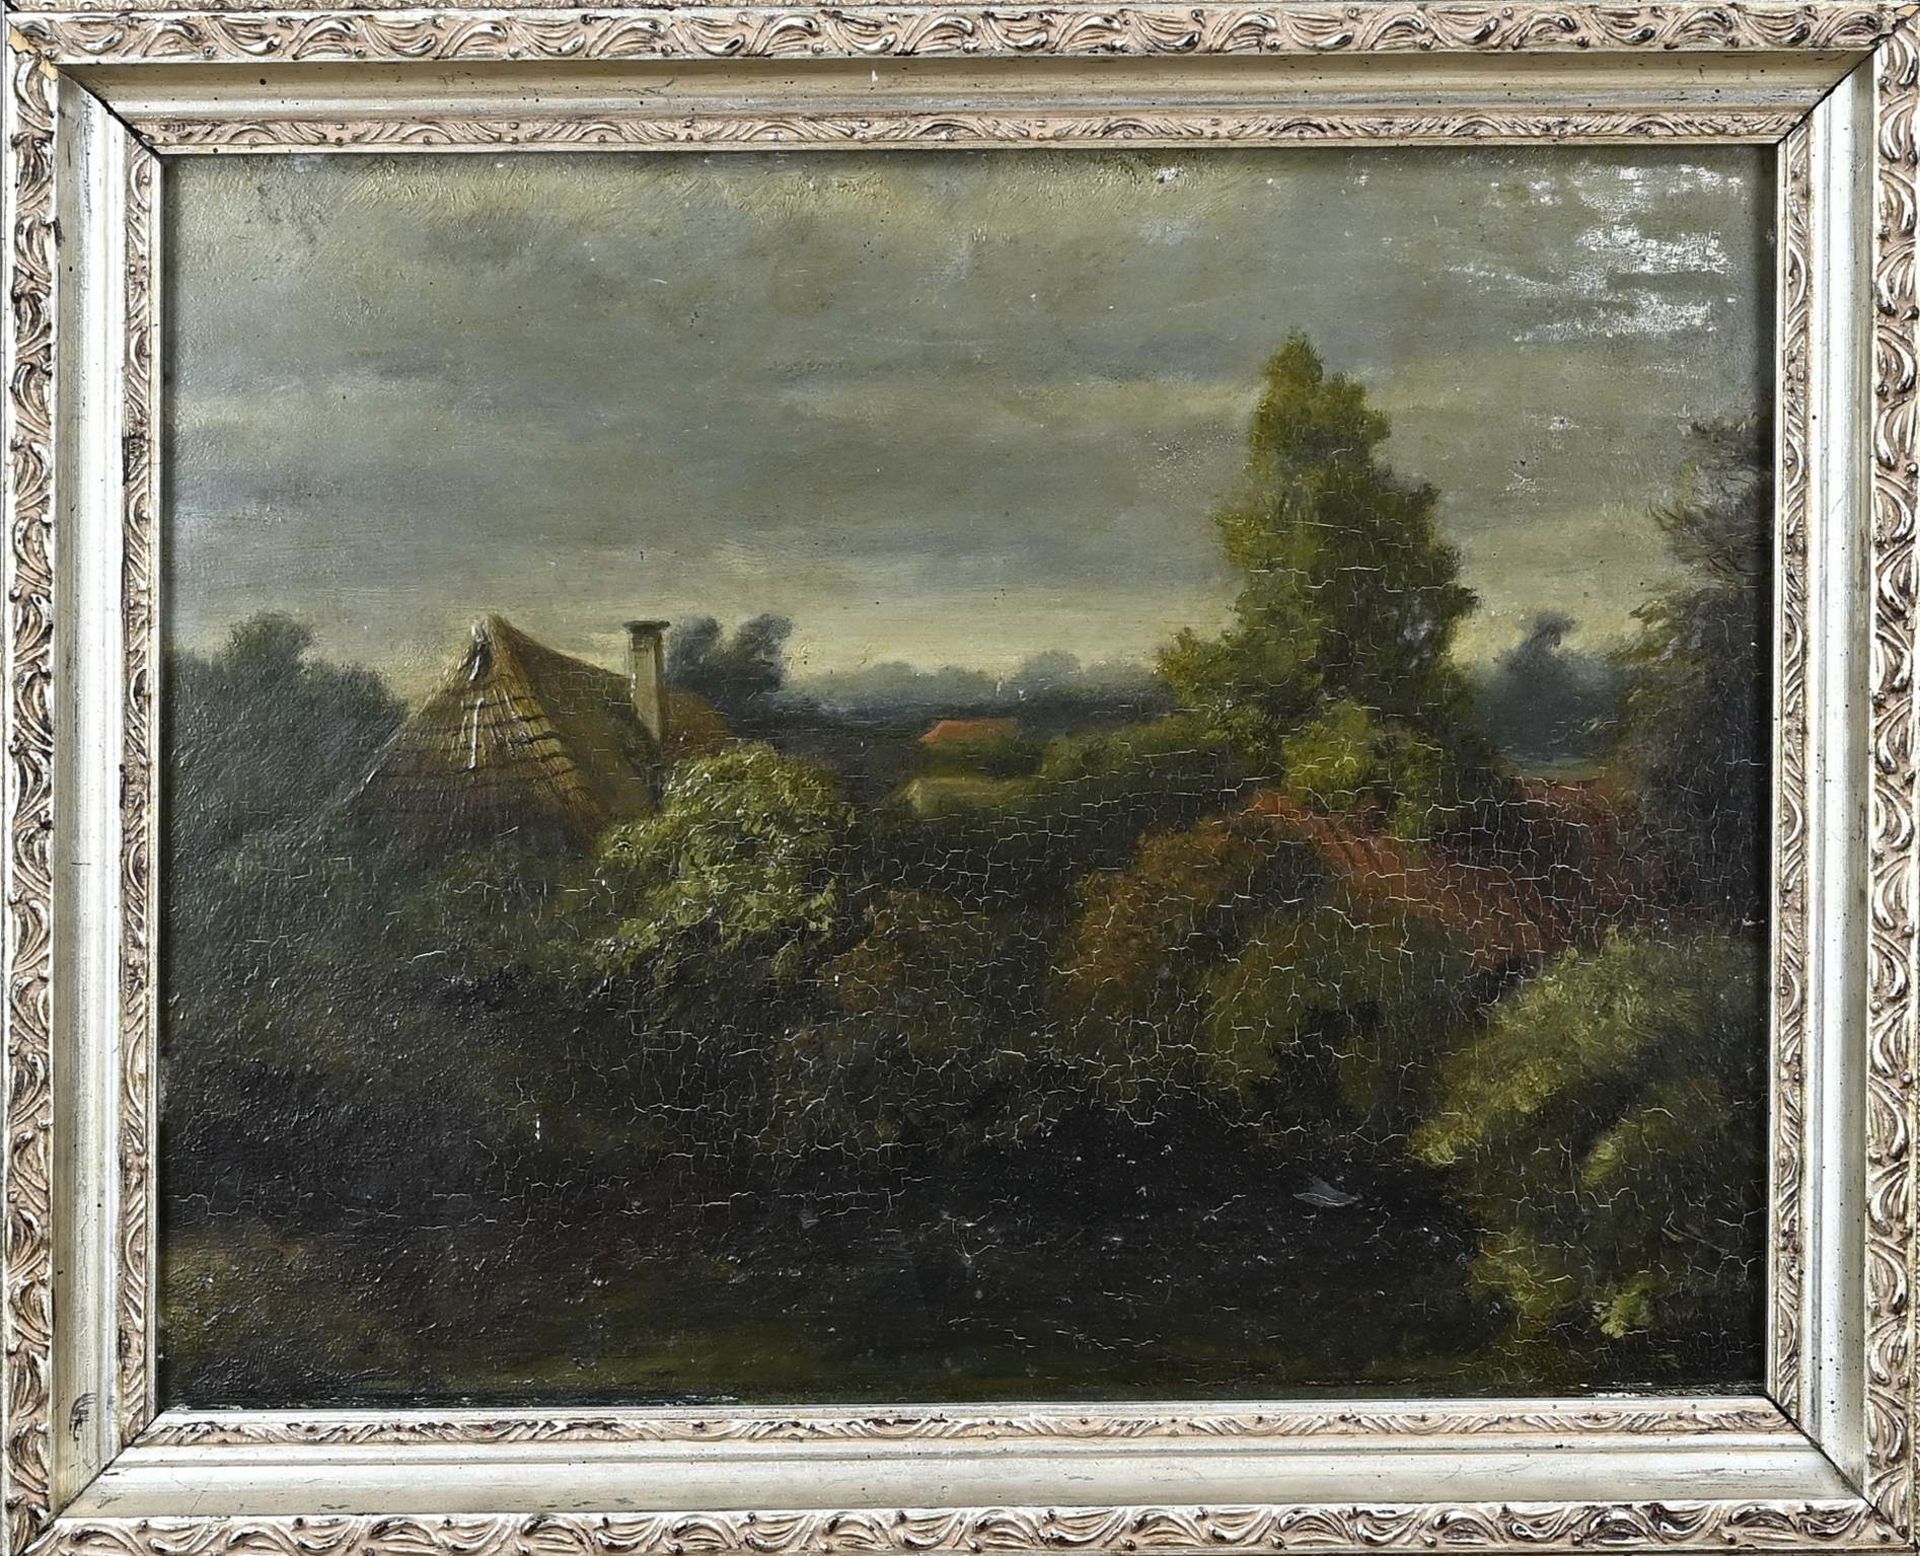 Unsigned, Landscape with house